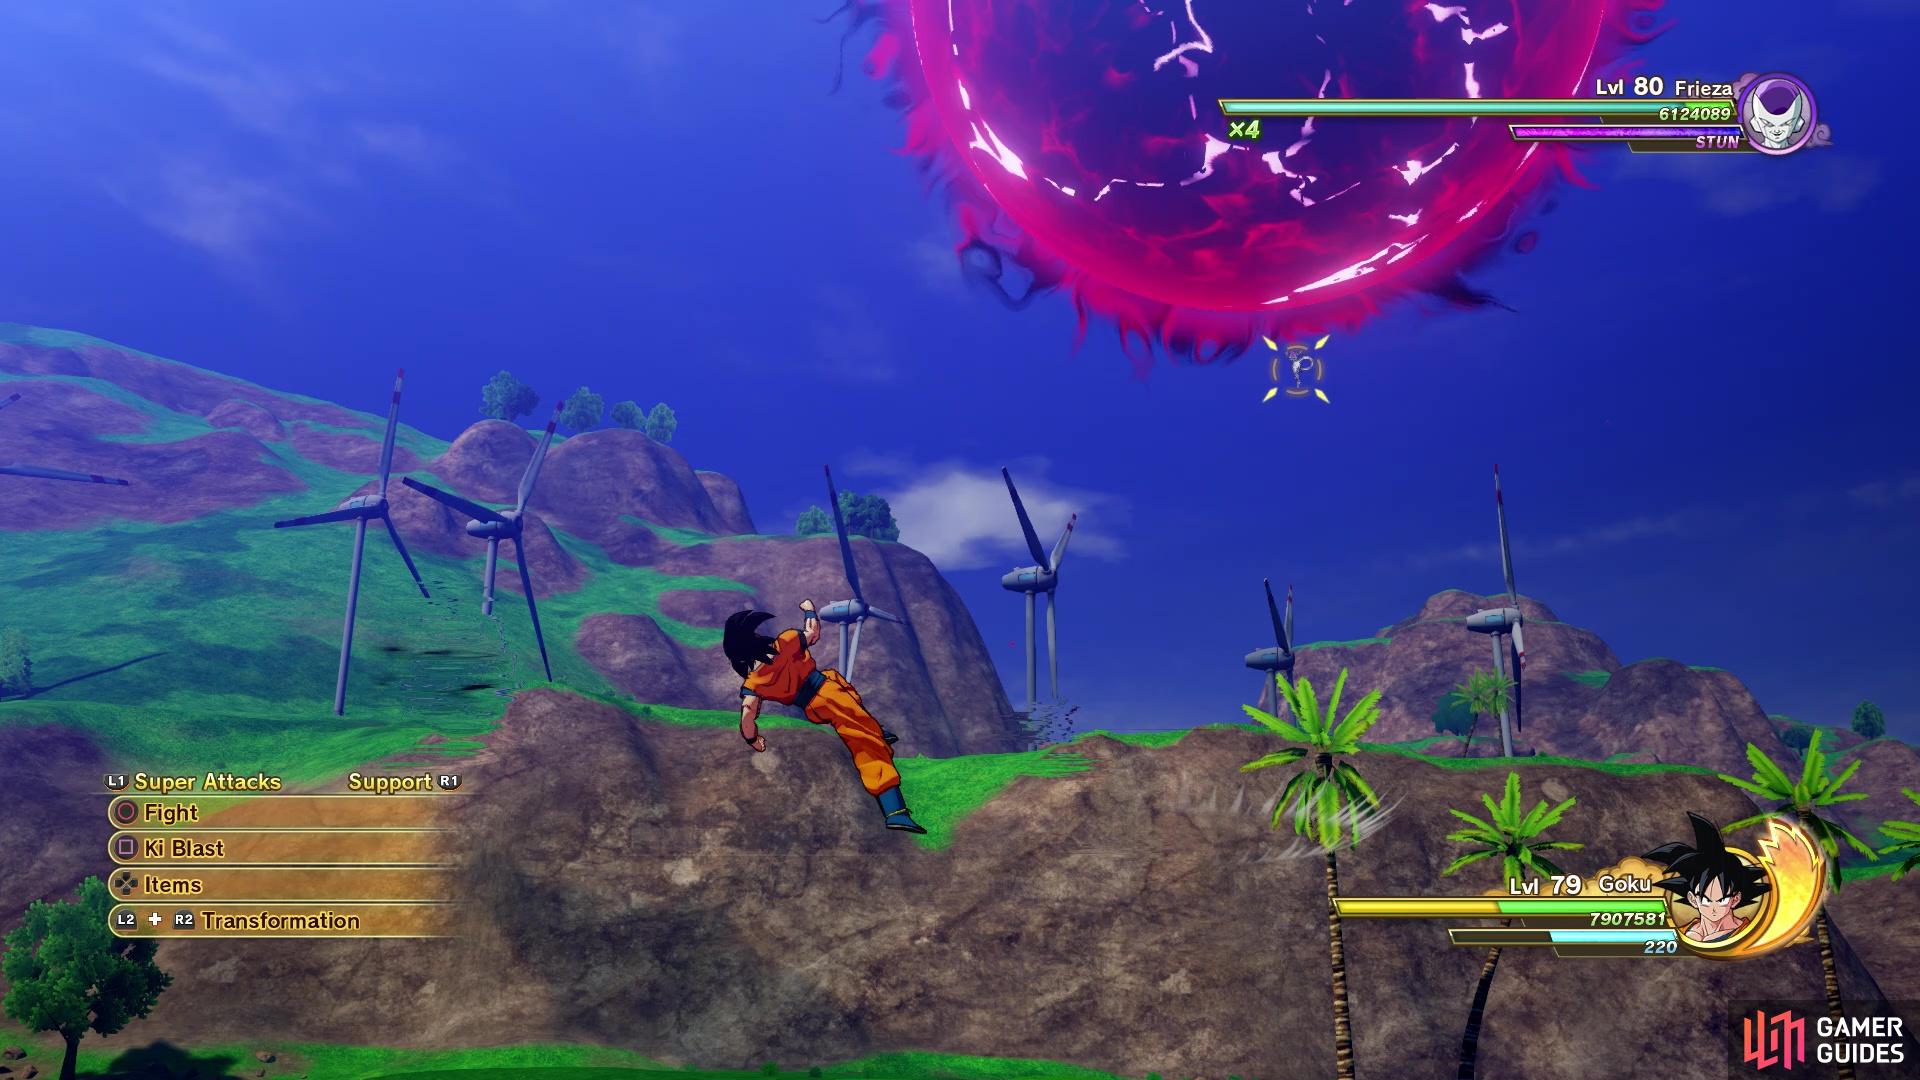 The second Frieza fight is more dangerous, due to attacks such as the Death Ball